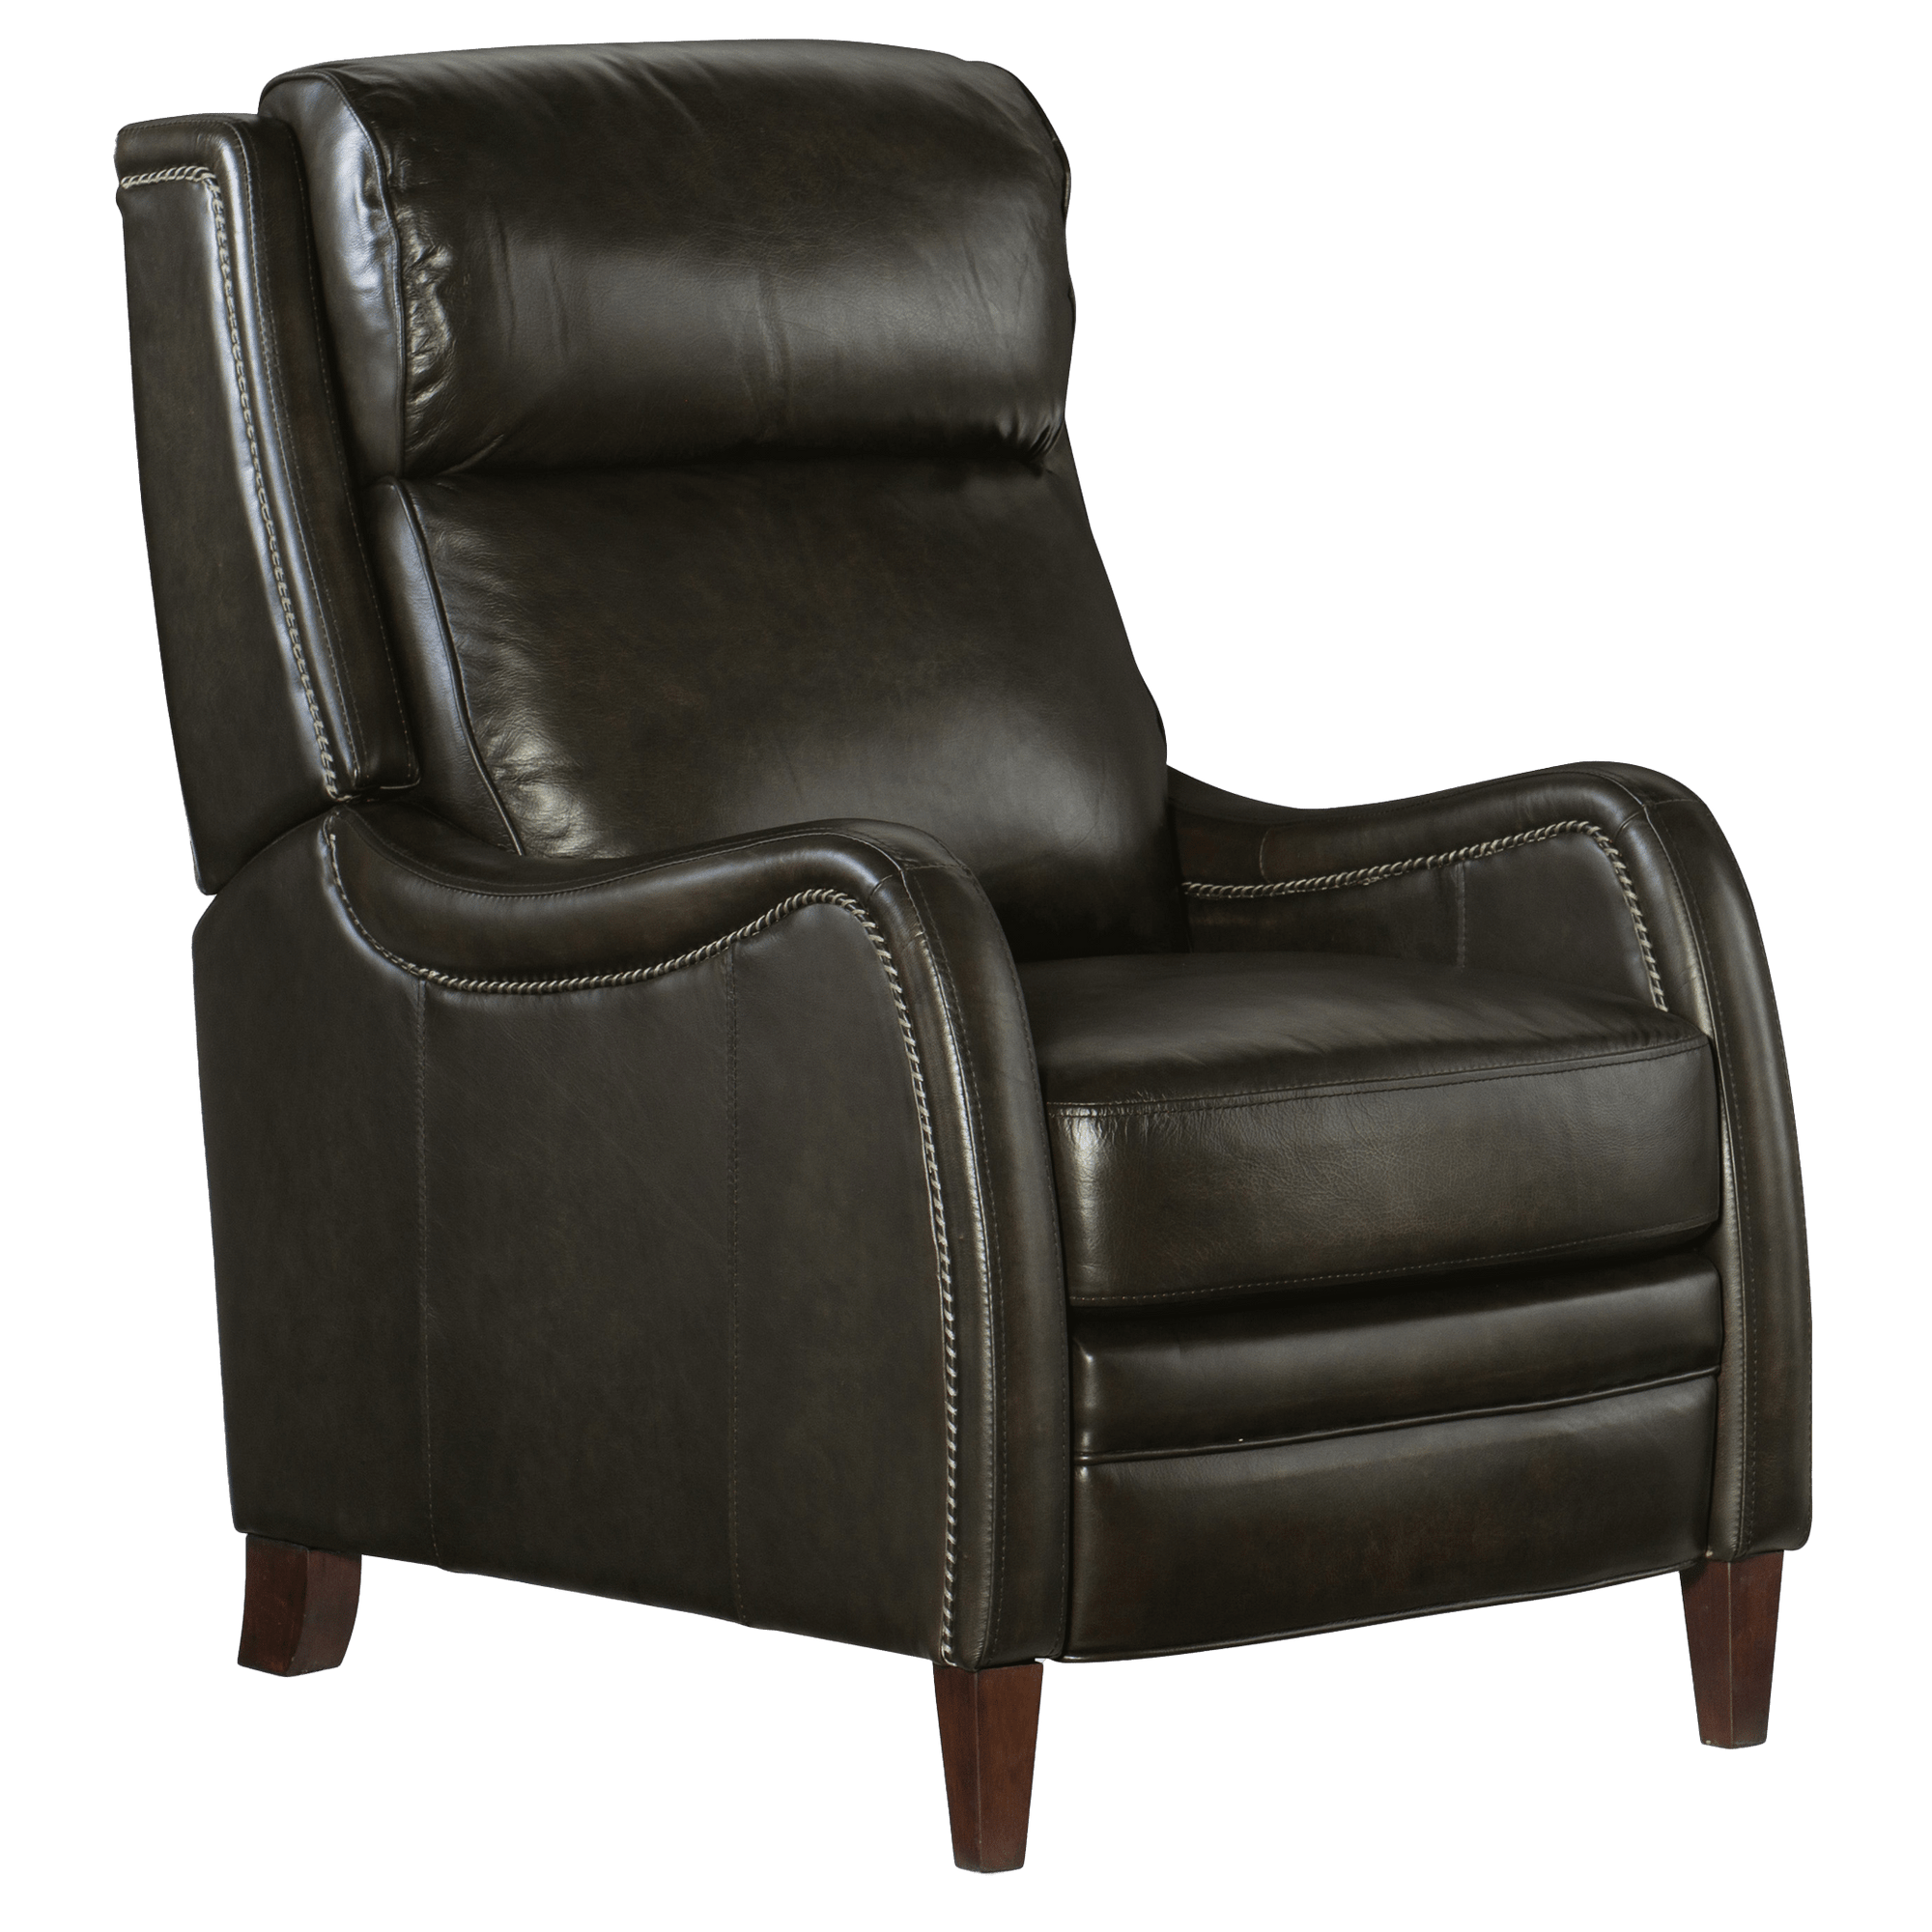 Sulema Manual Push Back Recliner, Leather - Coja